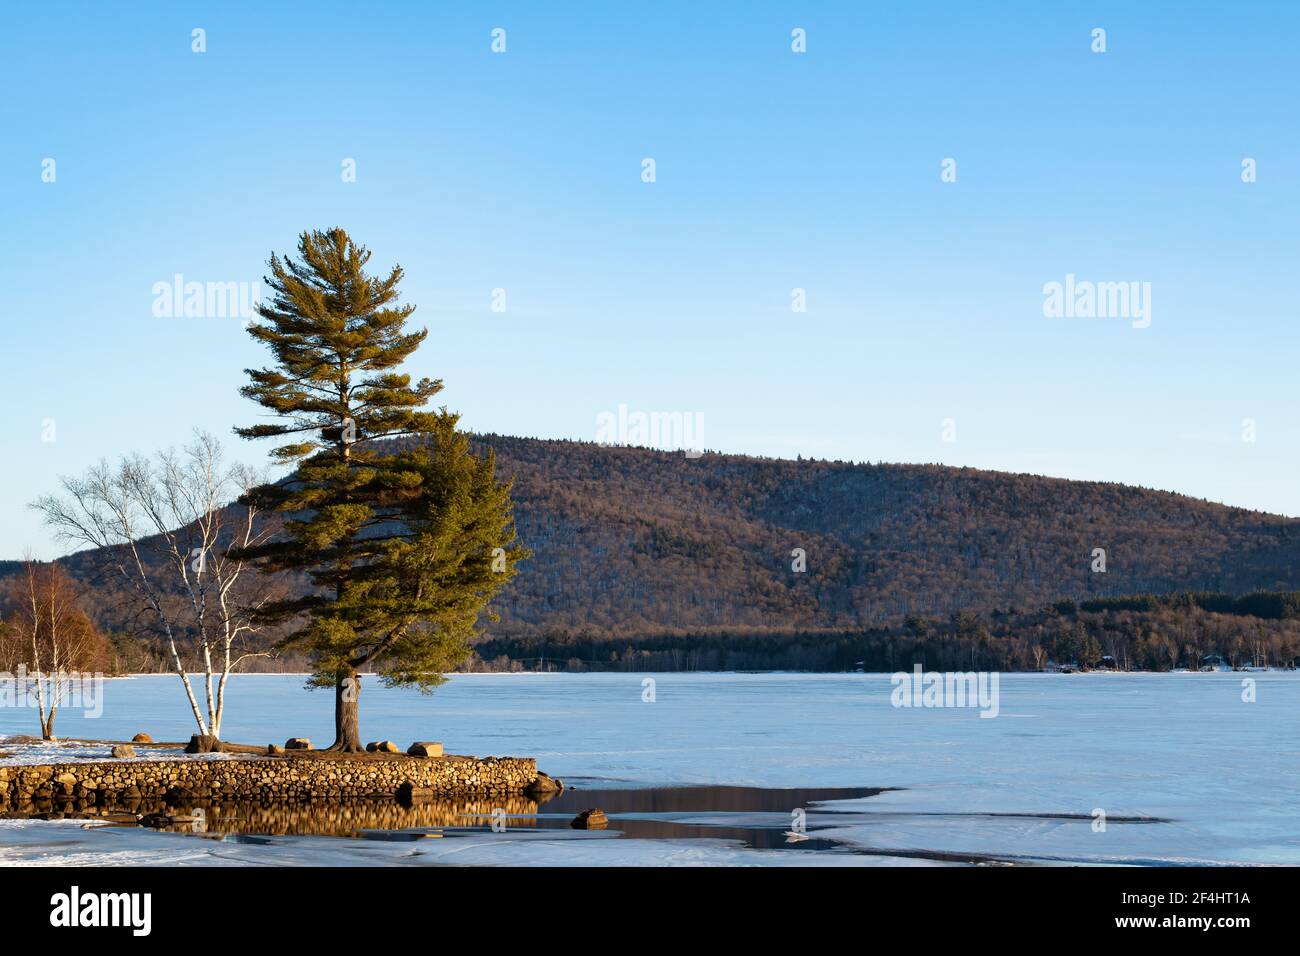 Osborne Point and Speculator Mountain on Lake Pleasant in Speculator, NY in late winter with ice still on the lake Stock Photo